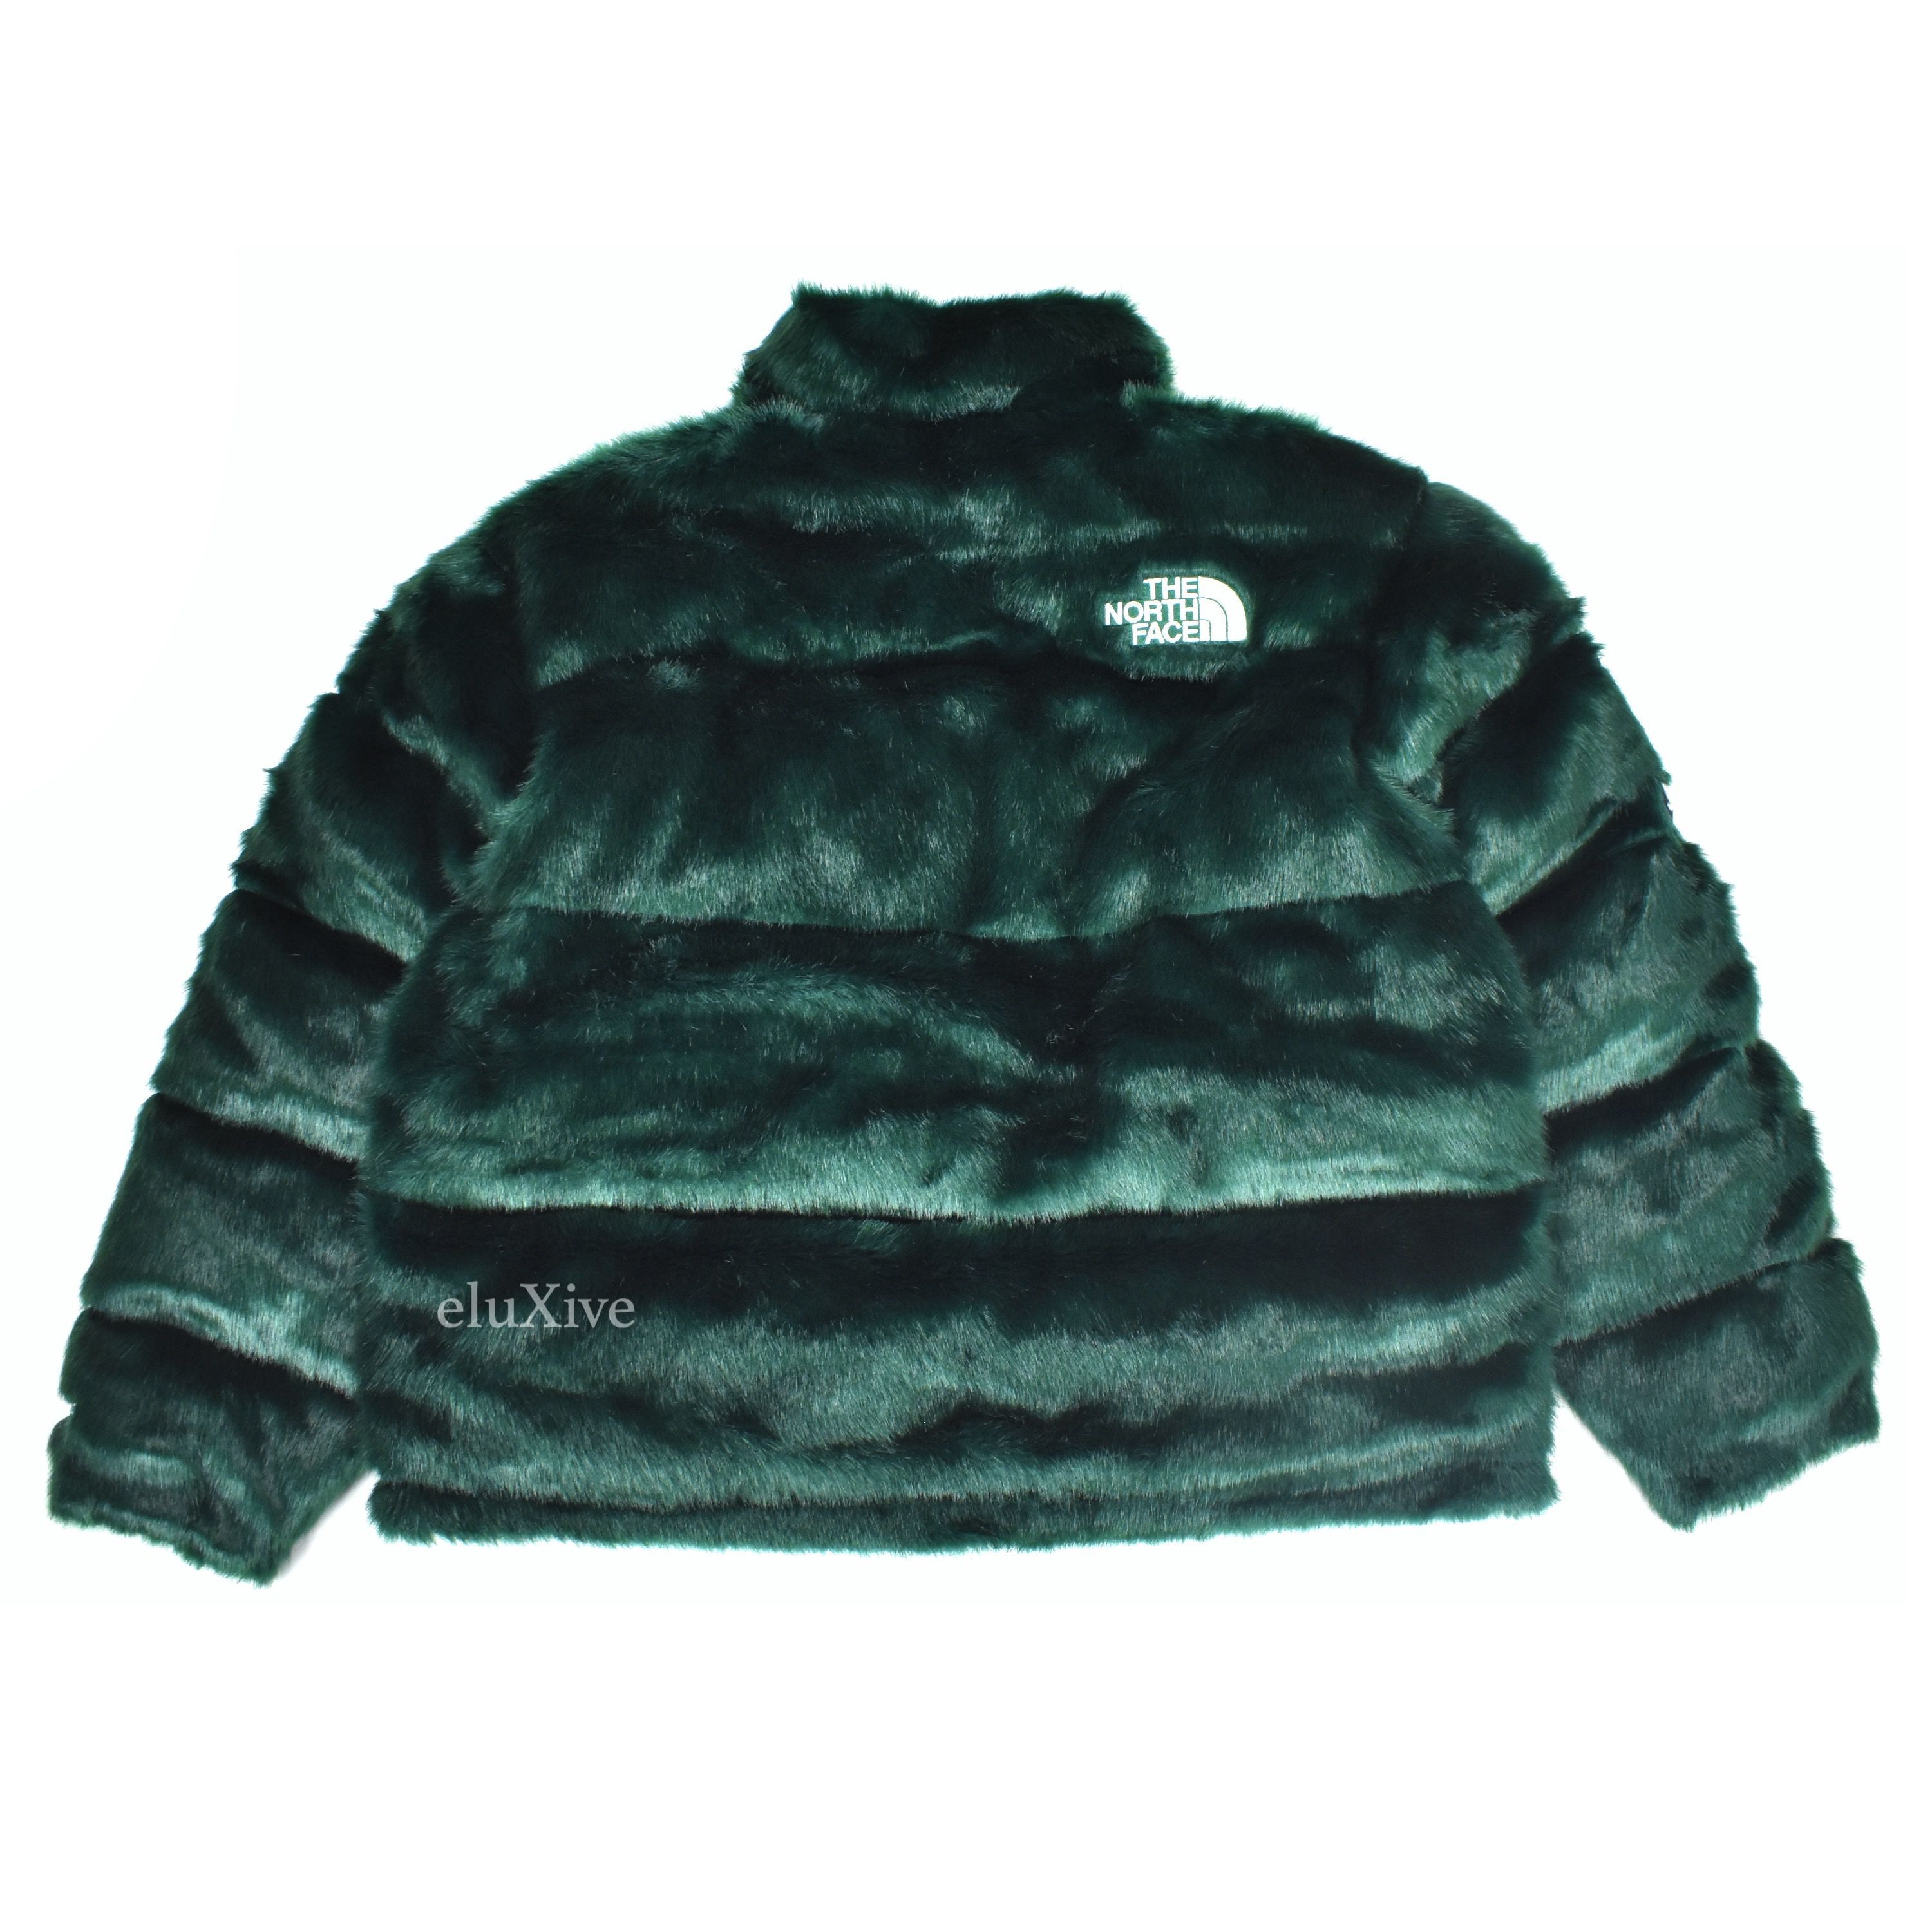 Supreme Supreme The North Face Faux Fur Nuptse Puffer Jacket Green | Grailed